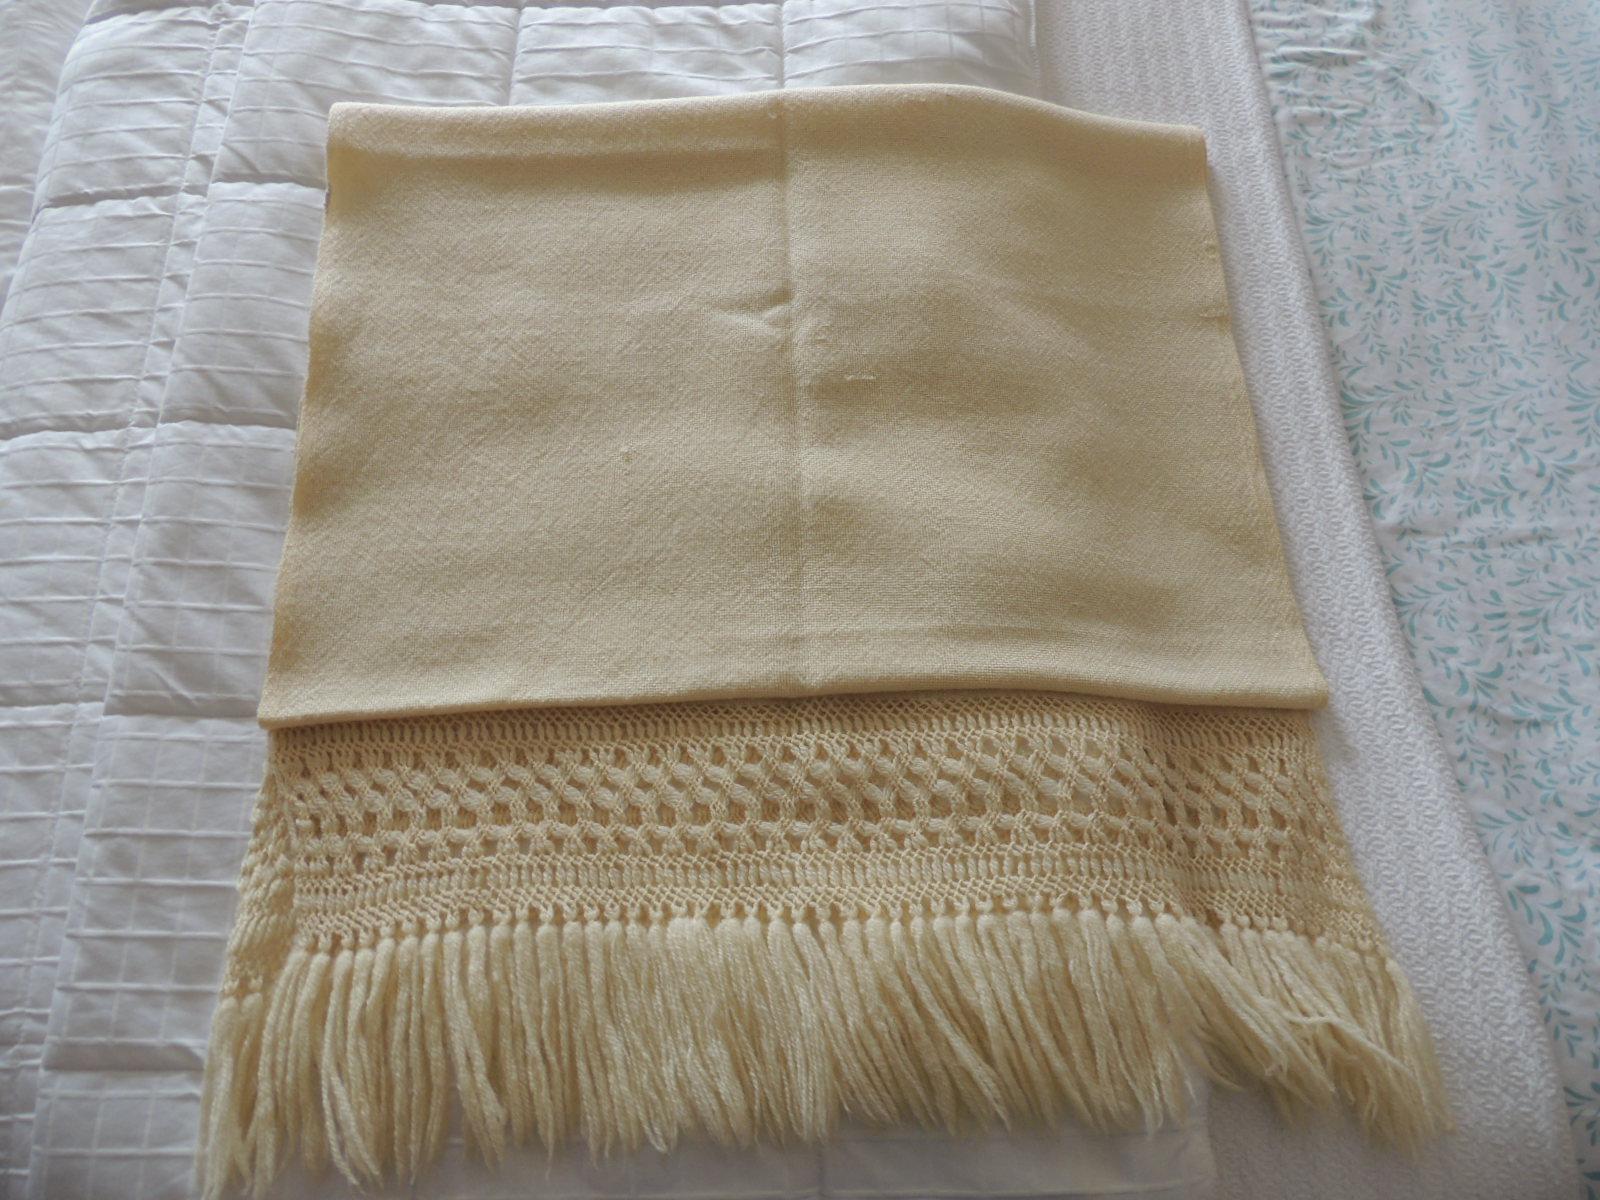 Vintage beige handwoven throw with hand knotted fringes
Handwoven in Mexico
Size: 74